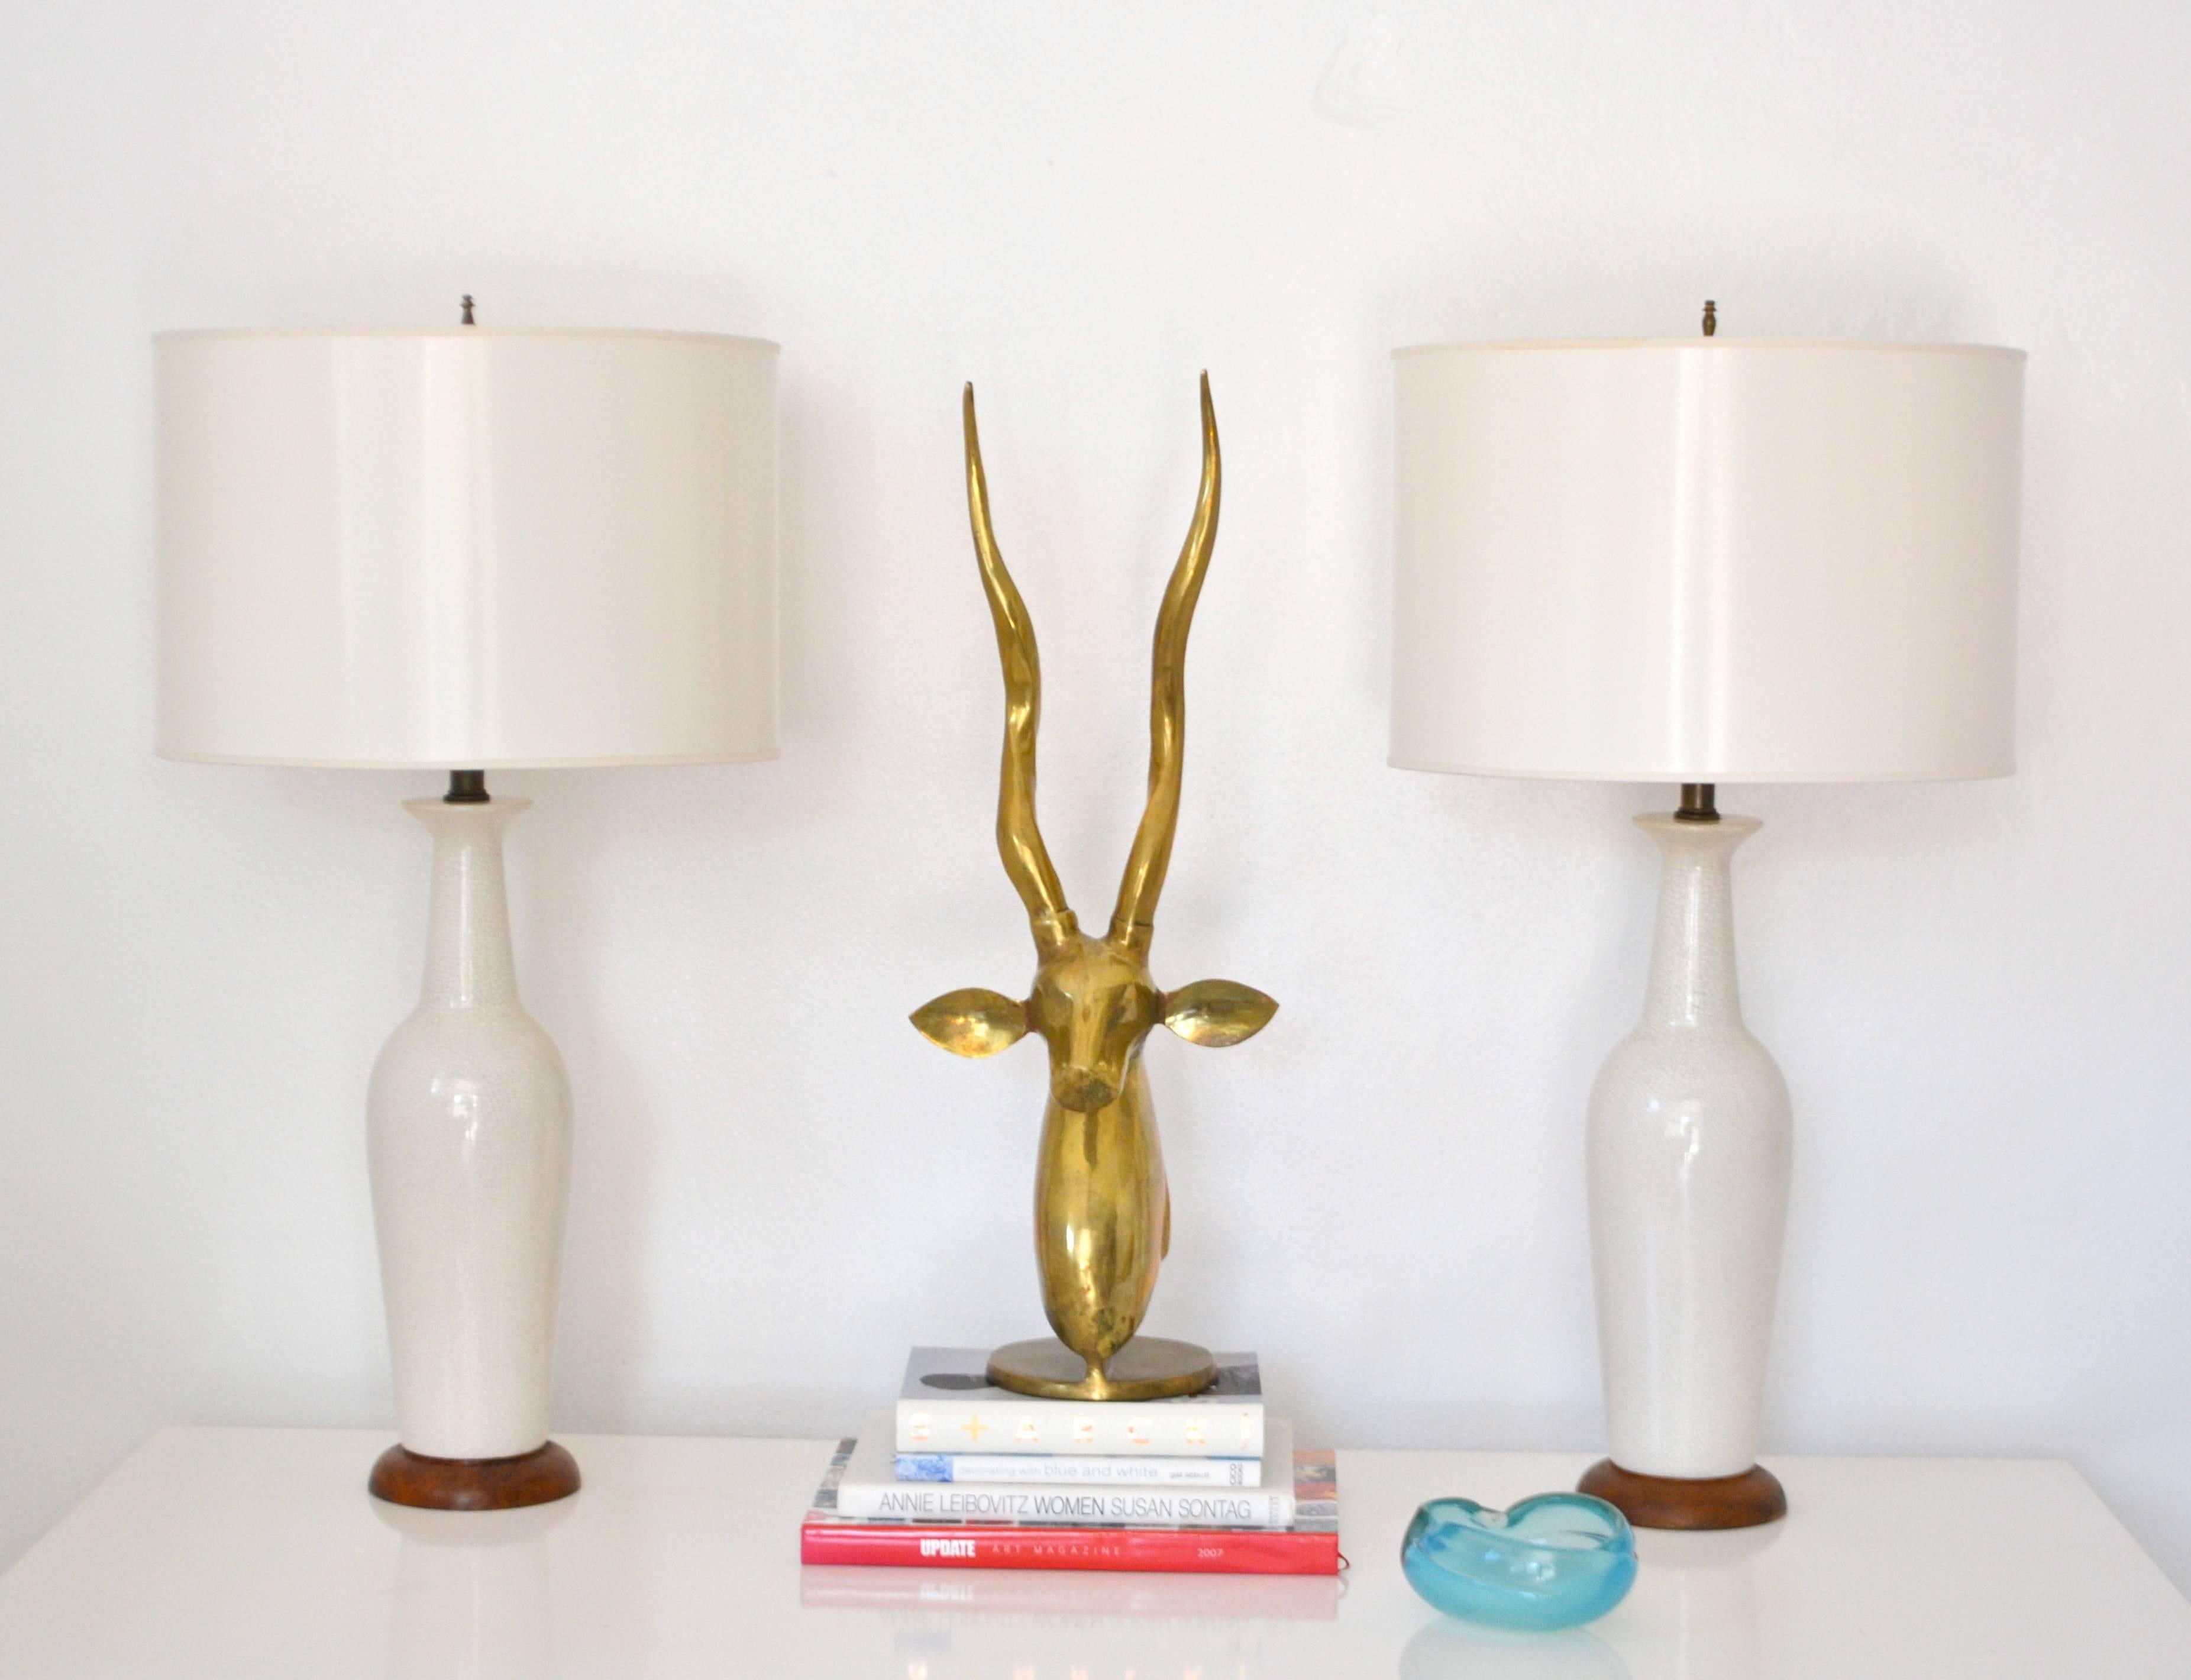 Striking pair of midcentury white crackle glazed ceramic bottle form table lamps, circa 1950s-1960s. These artisan crafted sculptural lamps are mounted on turned wood bases and wired with brass fittings. Shades not included.
Measurements: The